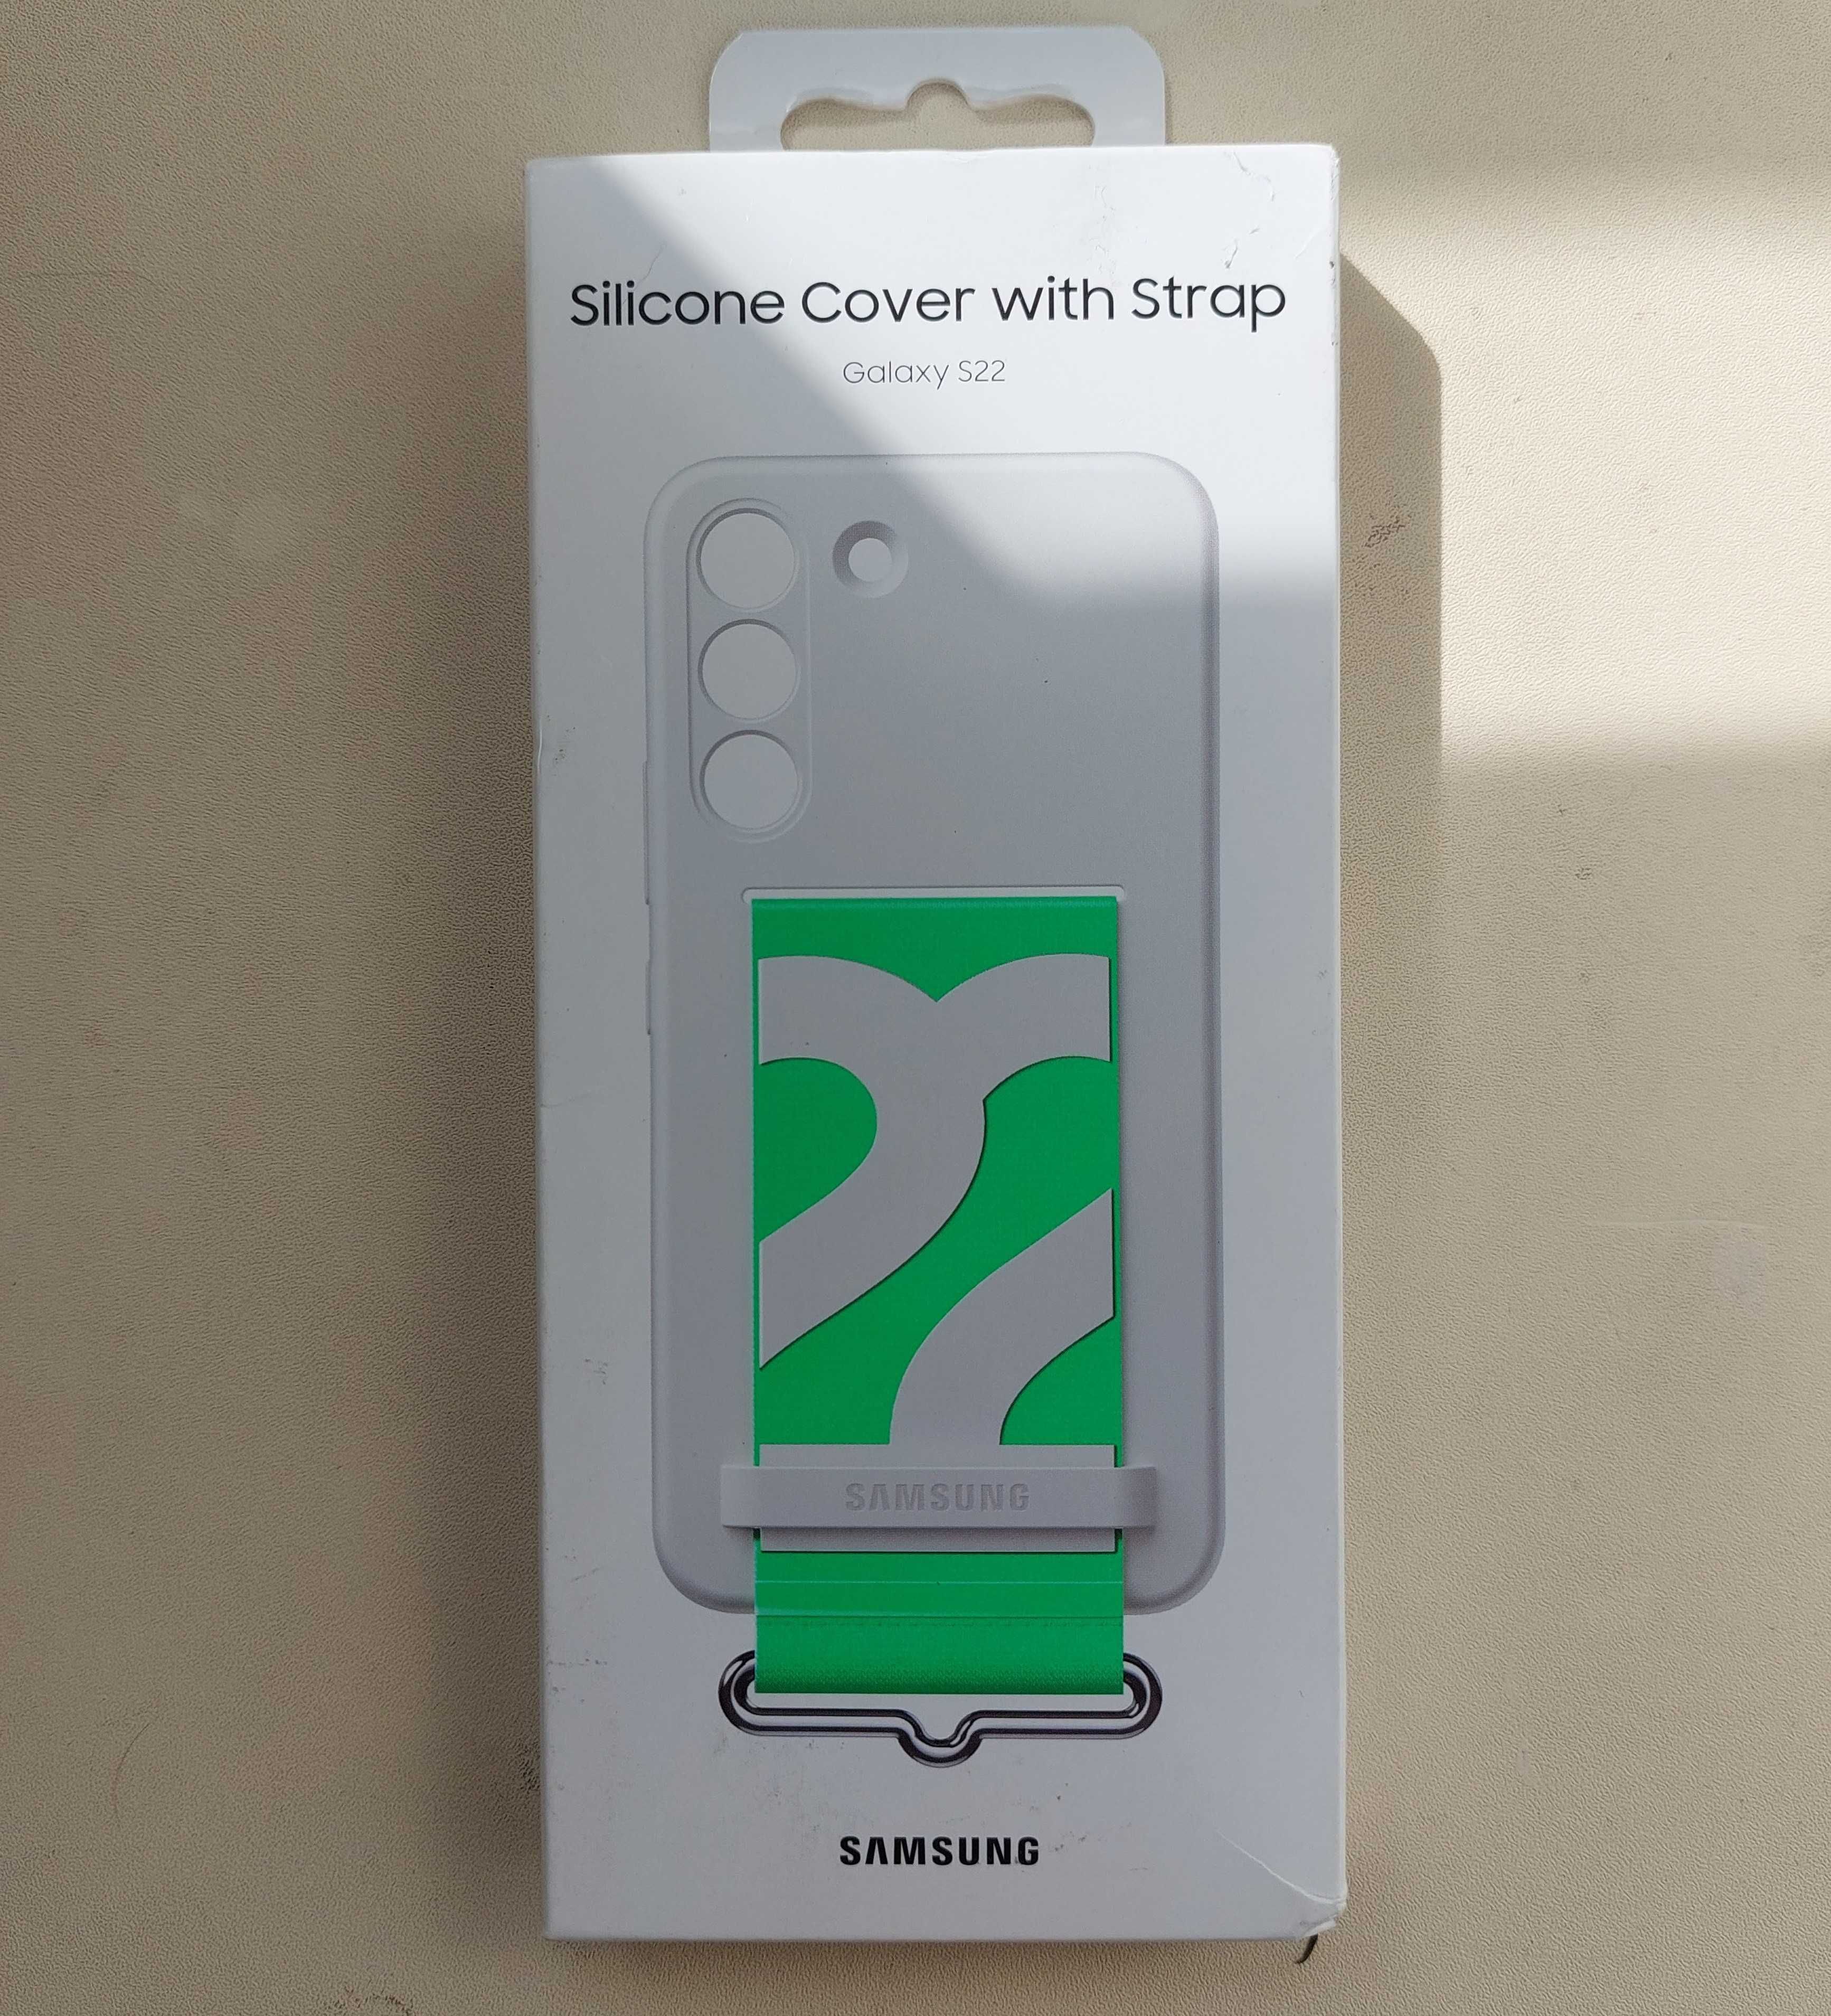 Samsung Galaxy S22 Silicone Cover with Strap